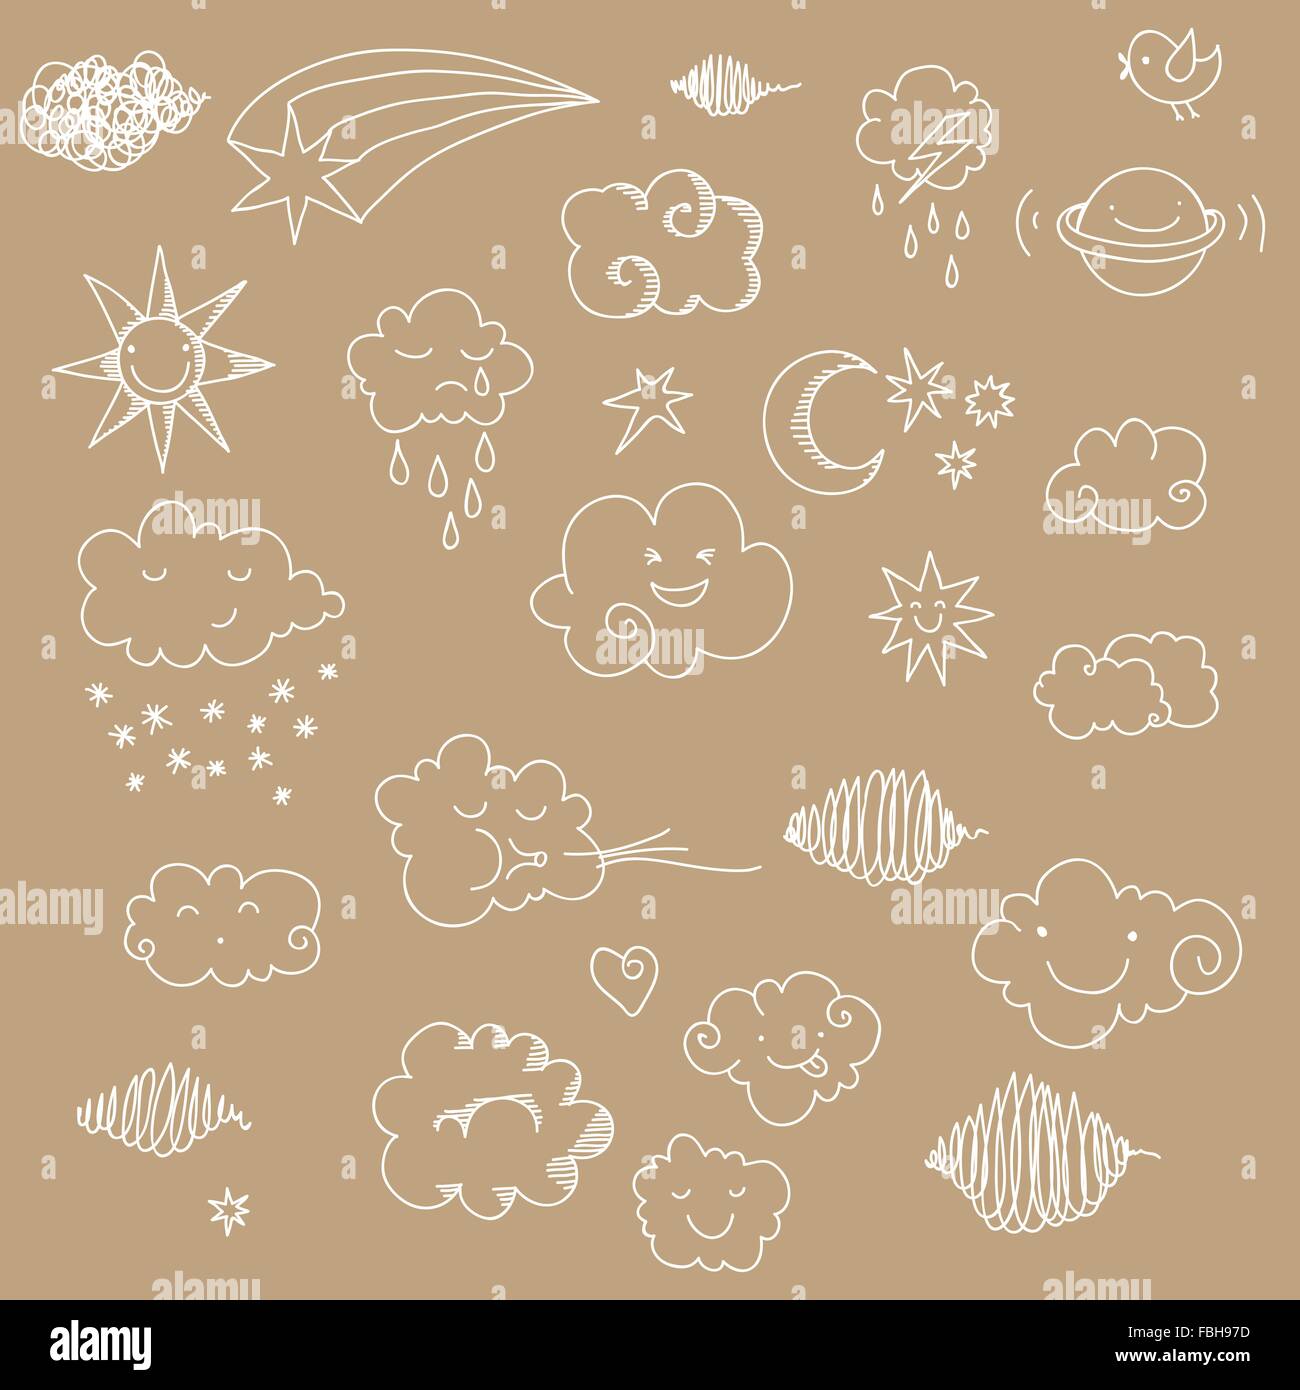 Cute sky doodle with clouds, sun, moon, stars, planet. Stock Vector